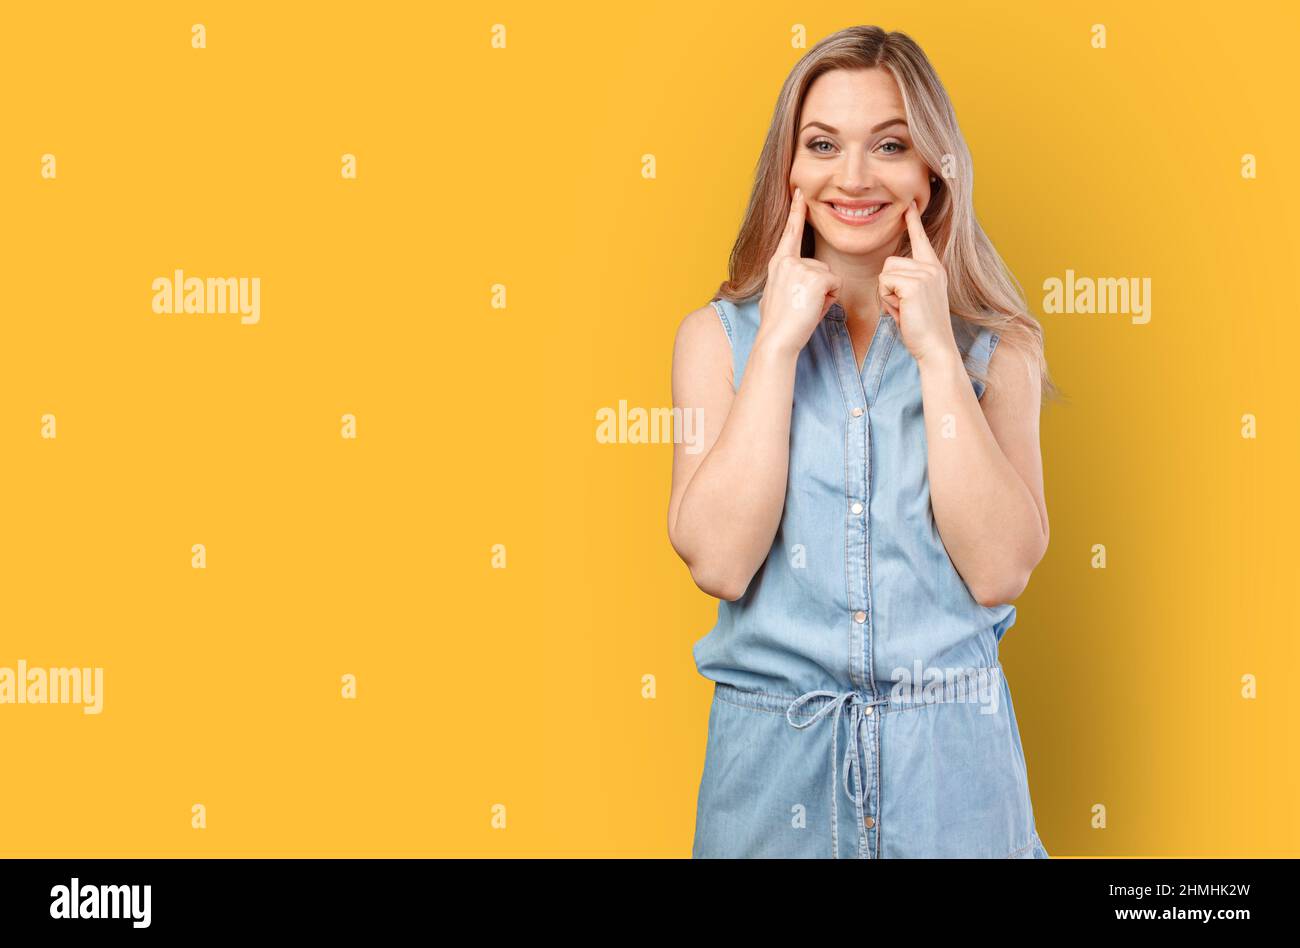 Beautiful young woman with fake smile isolated on color background. Stock Photo